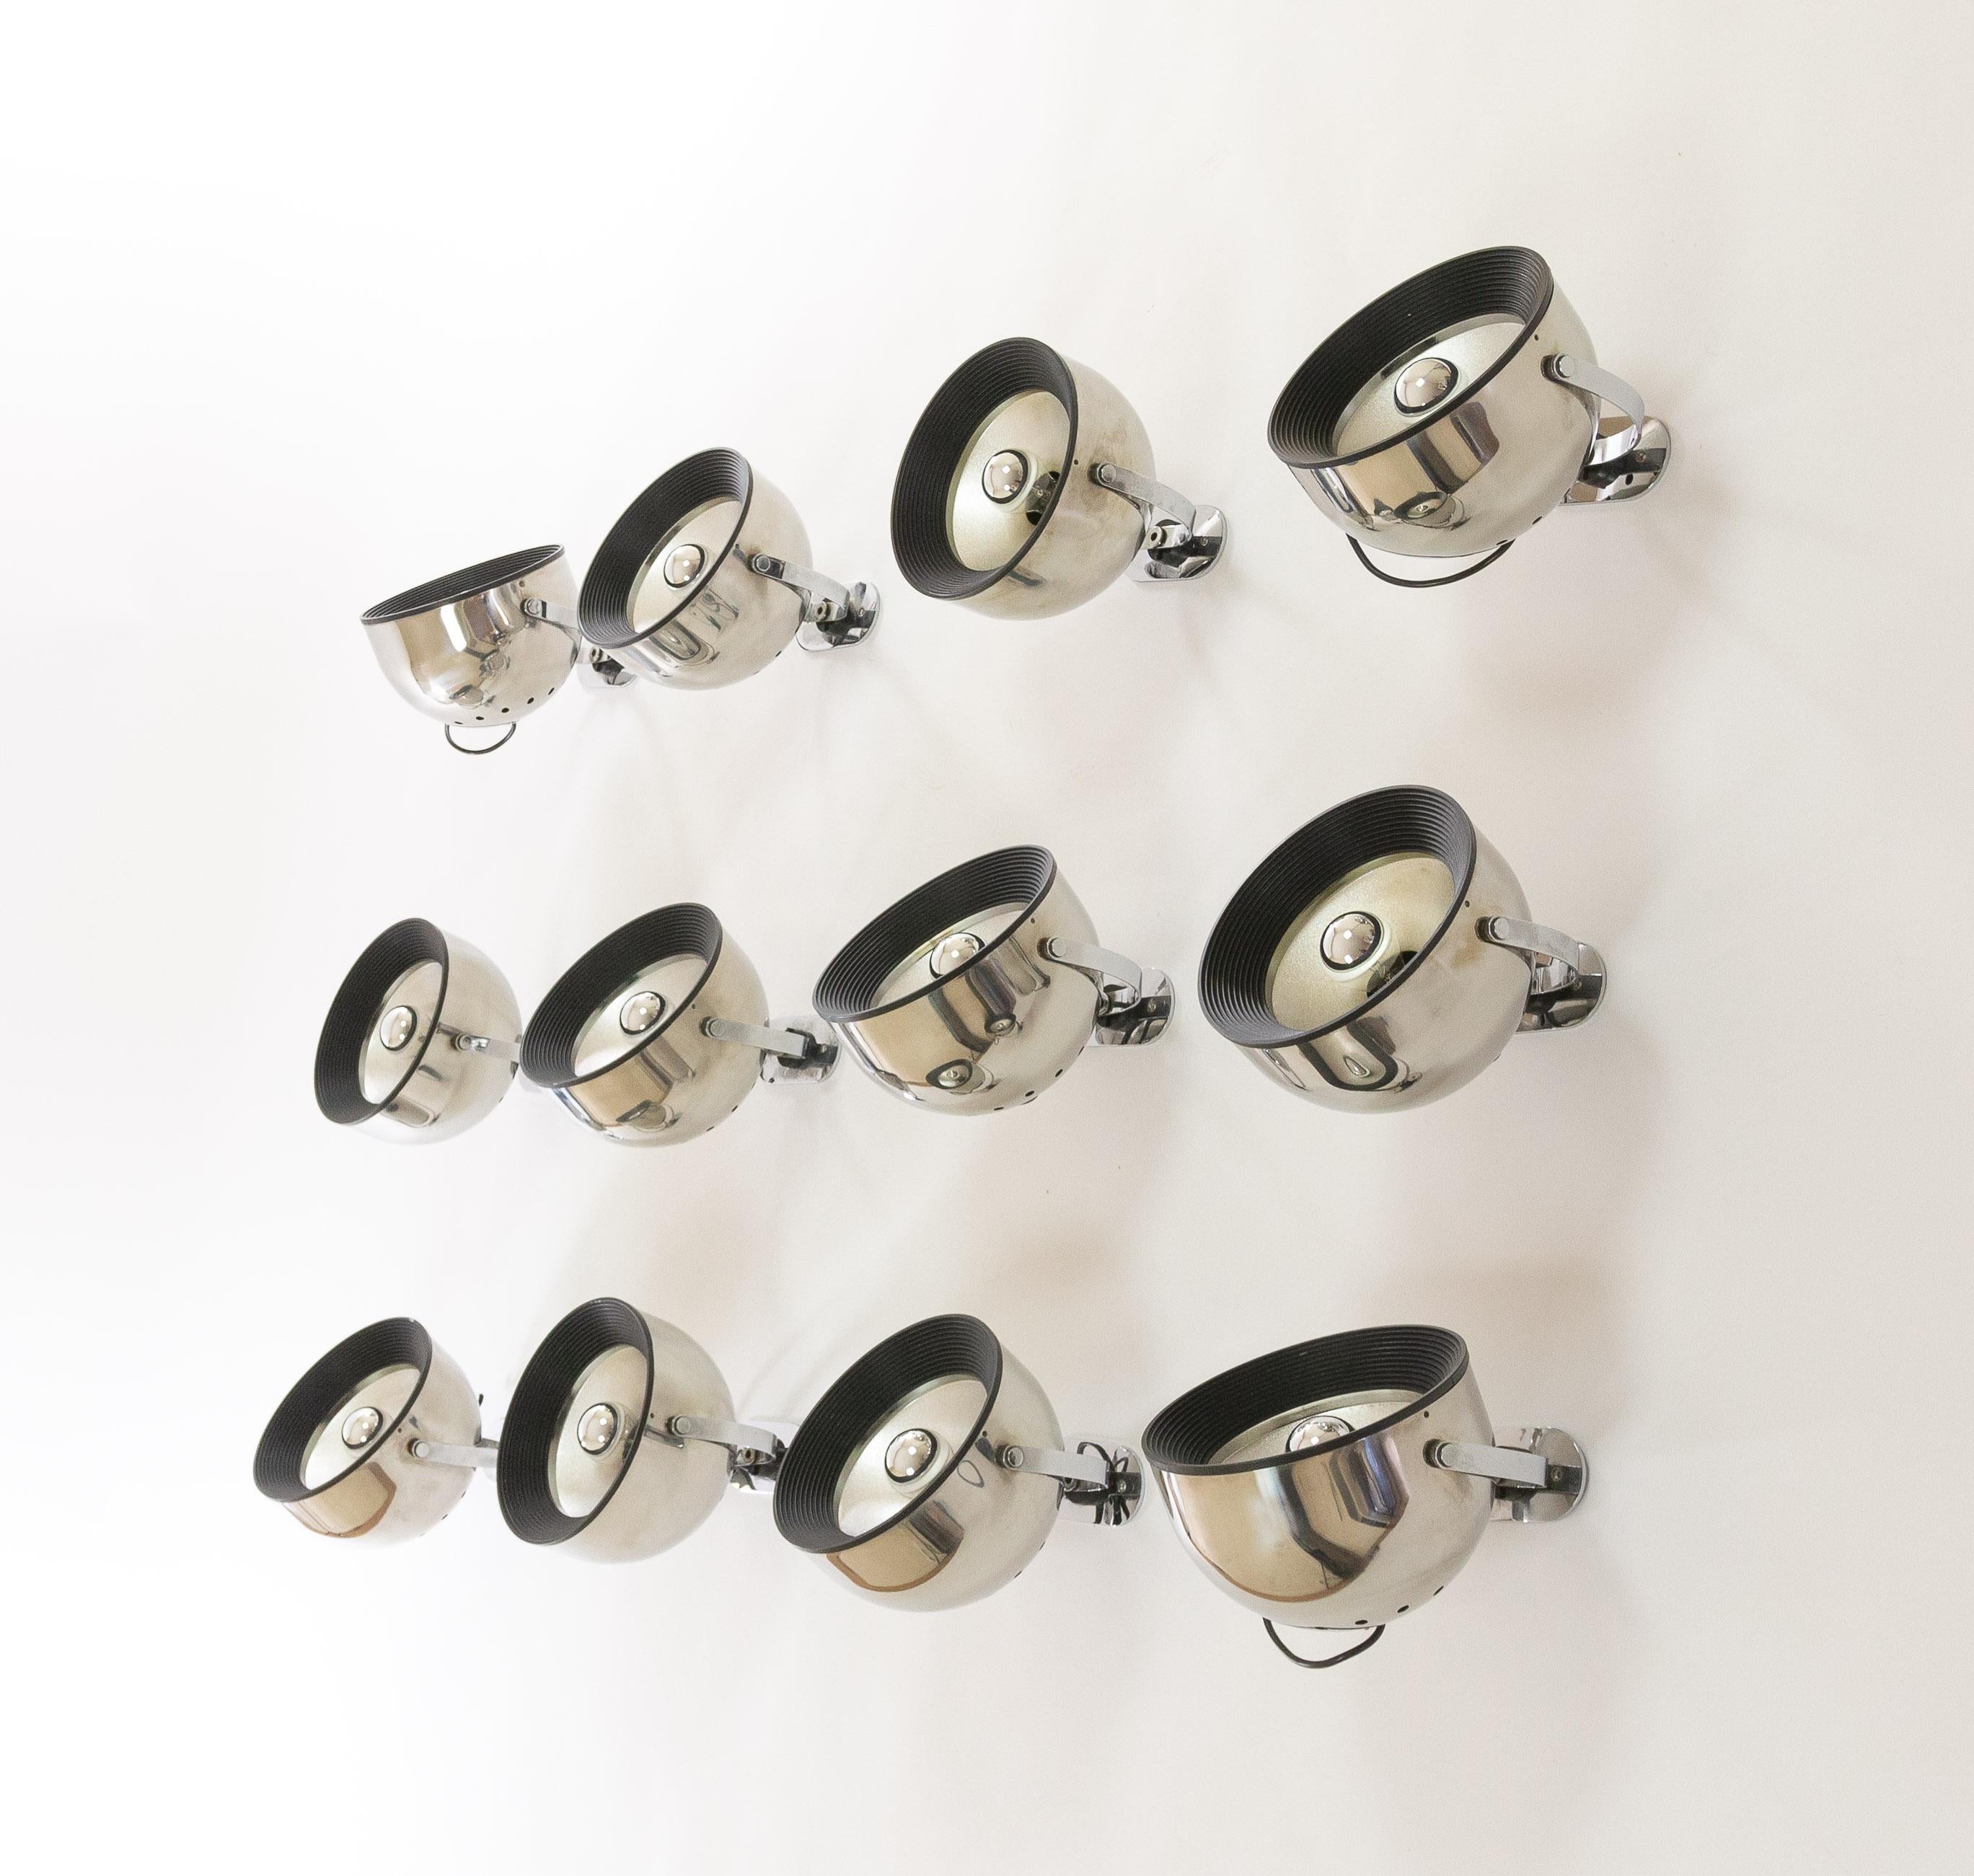 Set of 12 swiveling wall spots of chromed metal designed by Gae Aulenti and Livio Castiglioni for Stilnovo, 1970s.

As described in a catalogue by Stilnovo these lamps by Gae Aulenti and Livio Castiglioni have been designed in various versions: